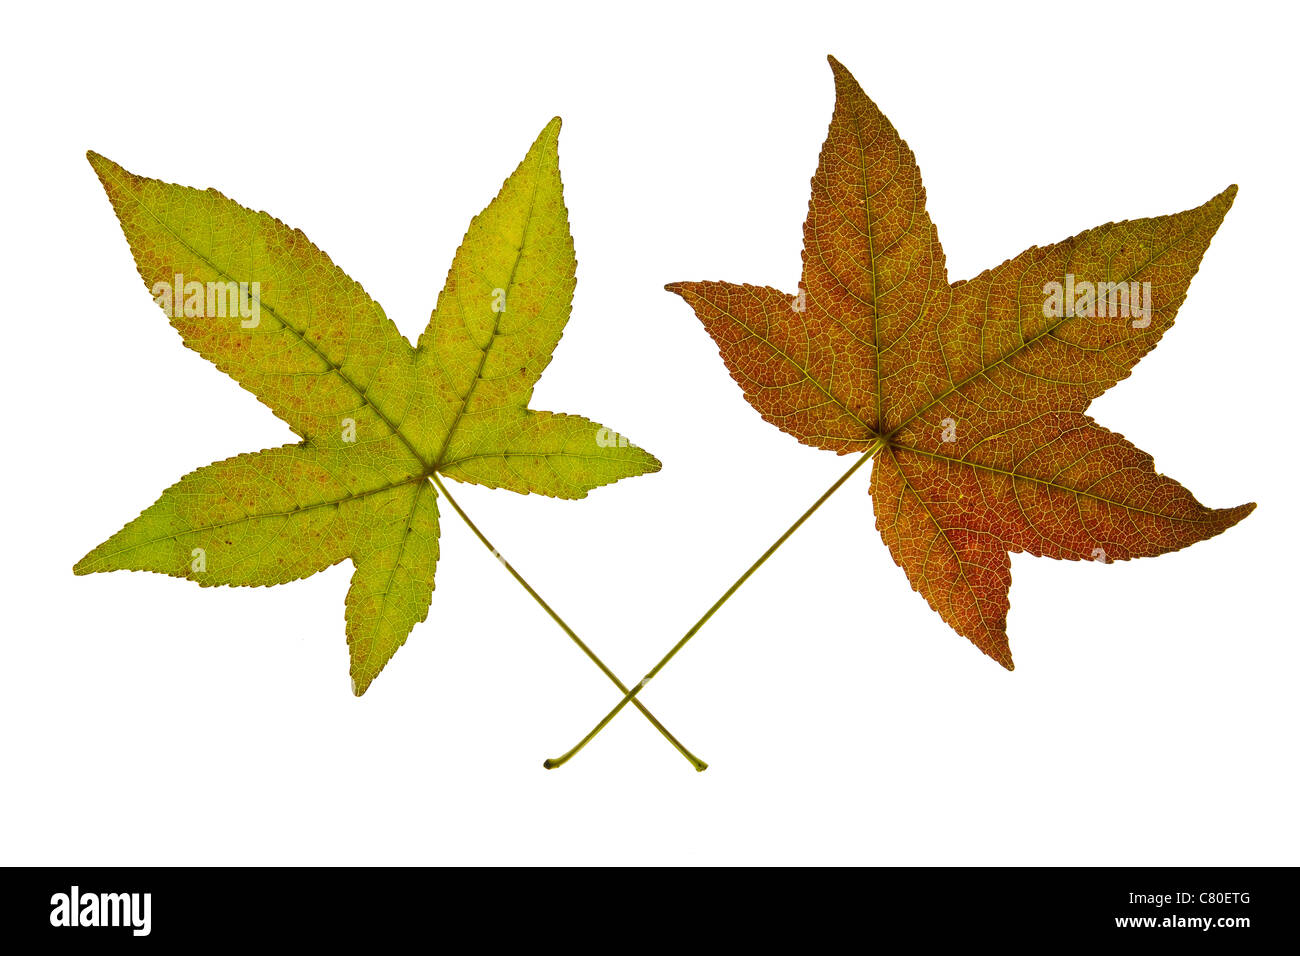 Two Maples Leaves Isolated on White Background Stock Photo